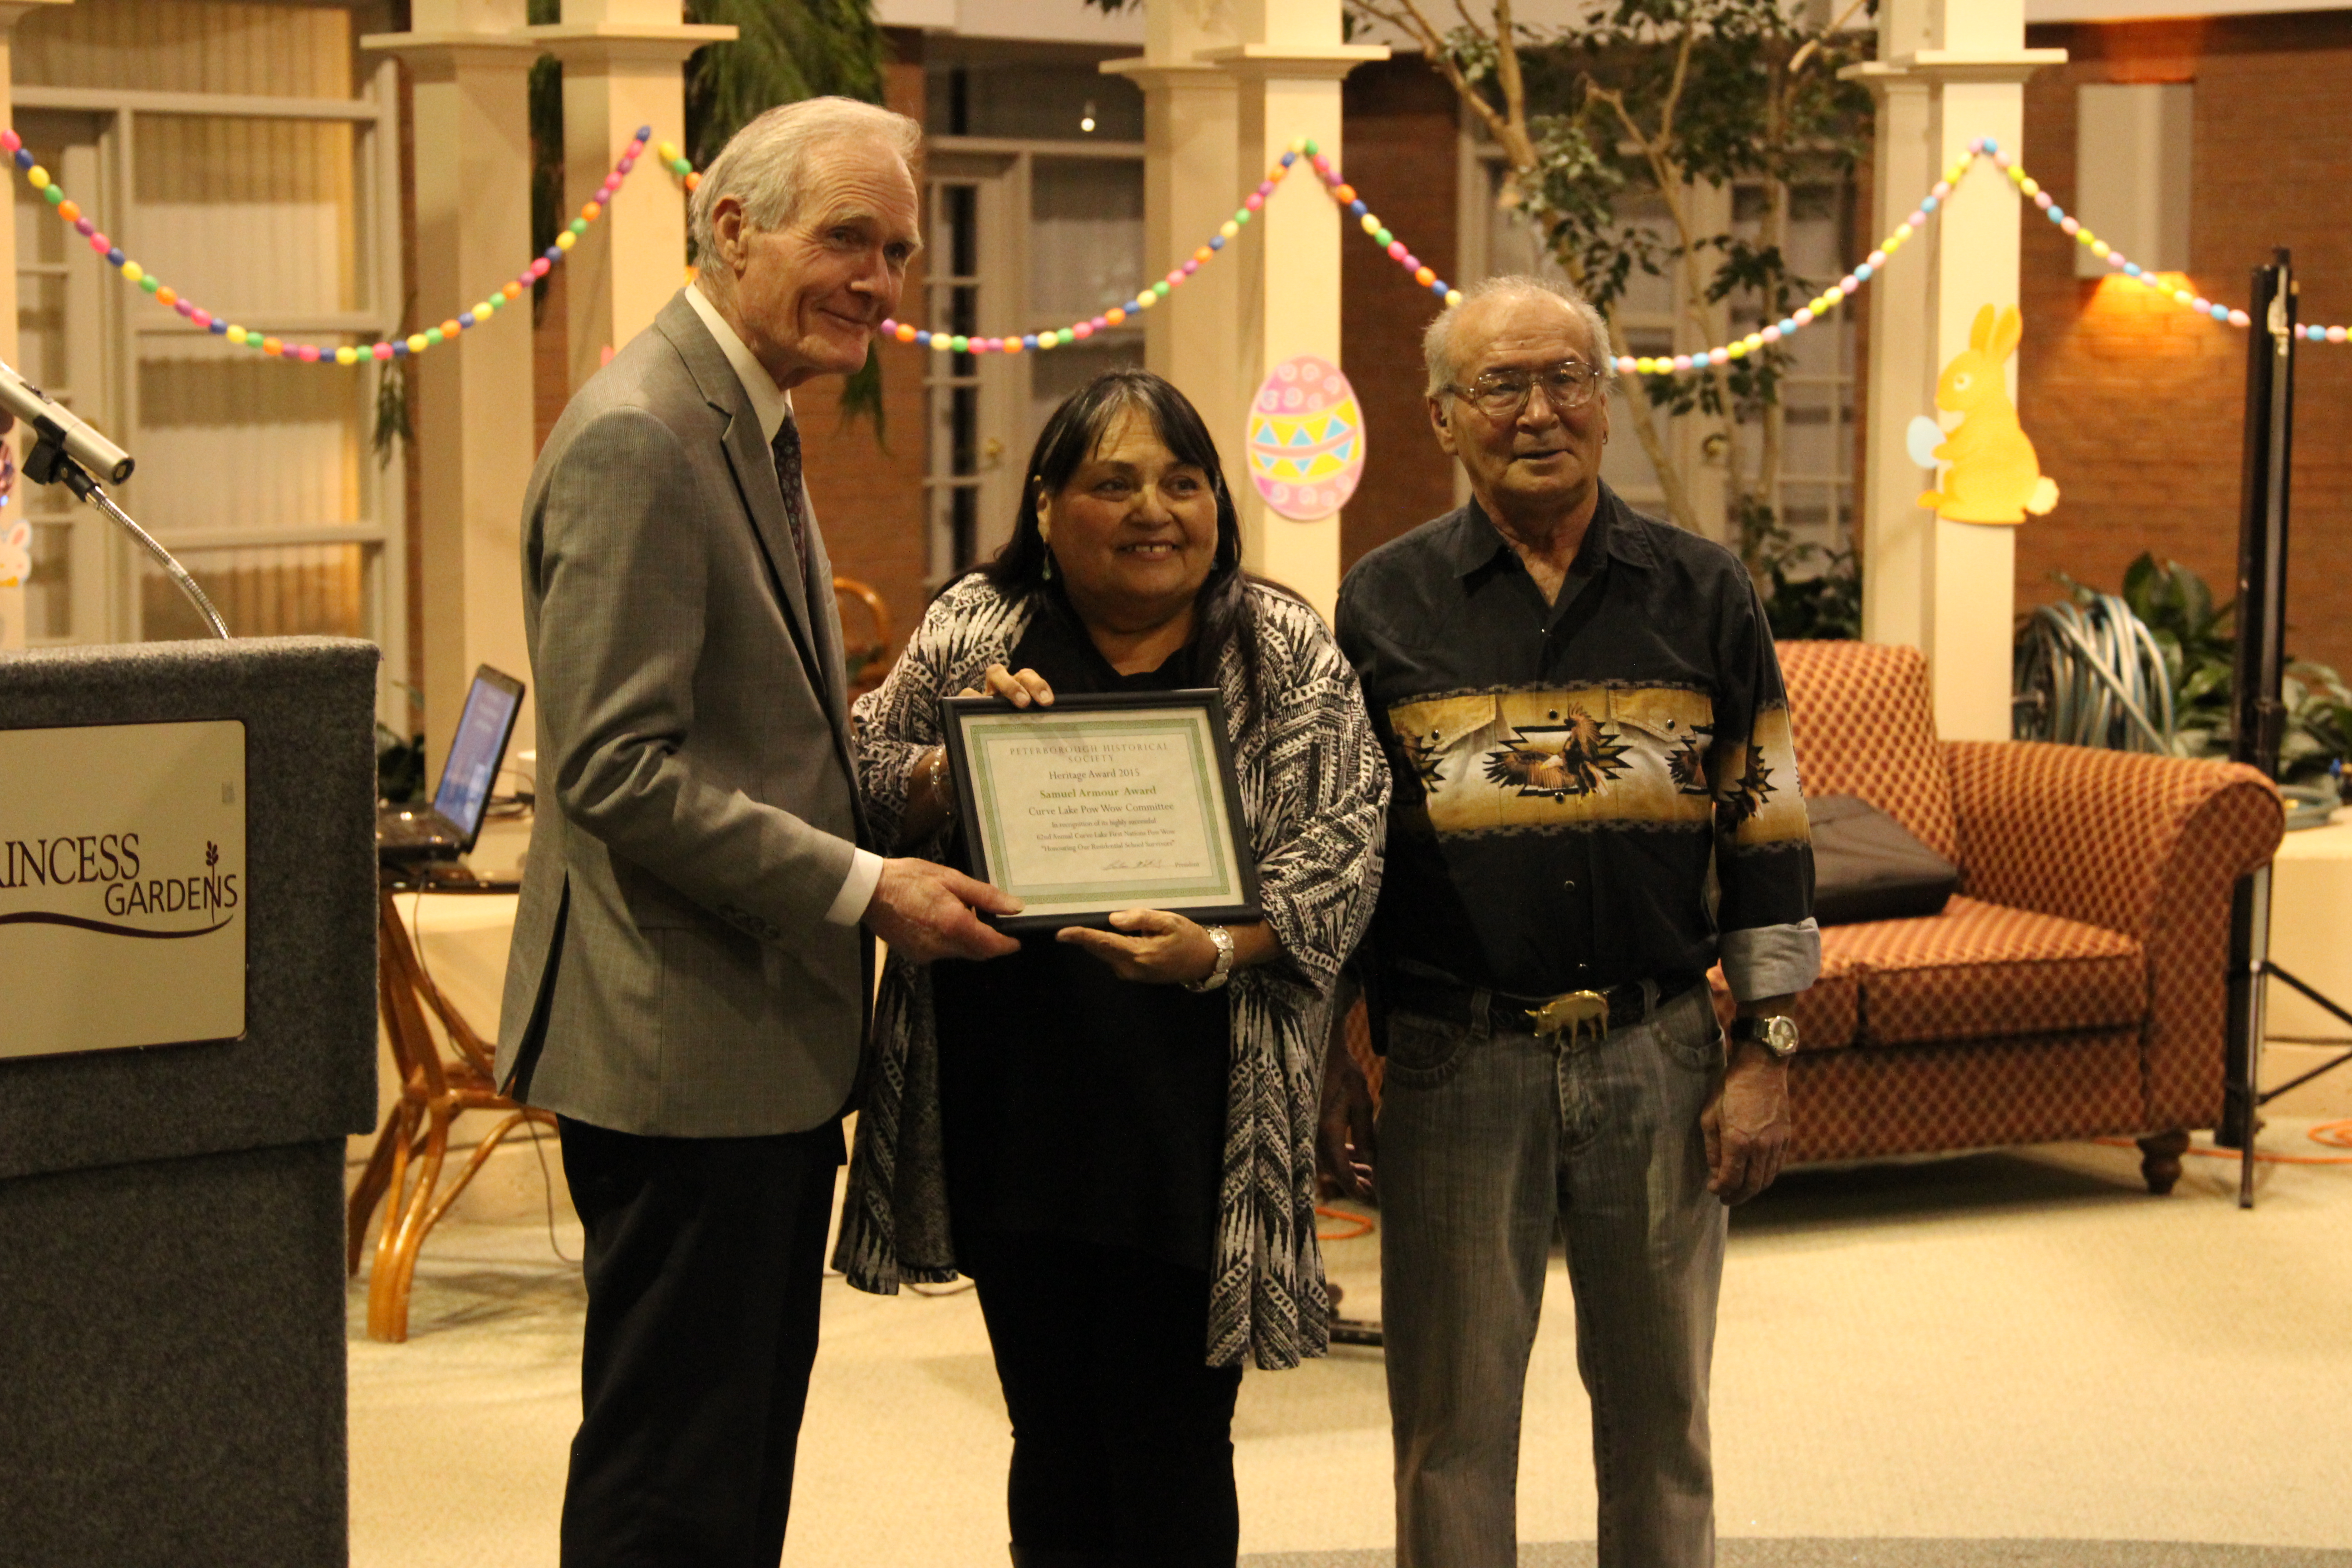 Graham Hart presenting the Samuel Armour Award to the Curve Lake Pow Wow Committee in recognition of its successful 62nd Annual Curve Lake First Nations Pow Wow held in September 2015.